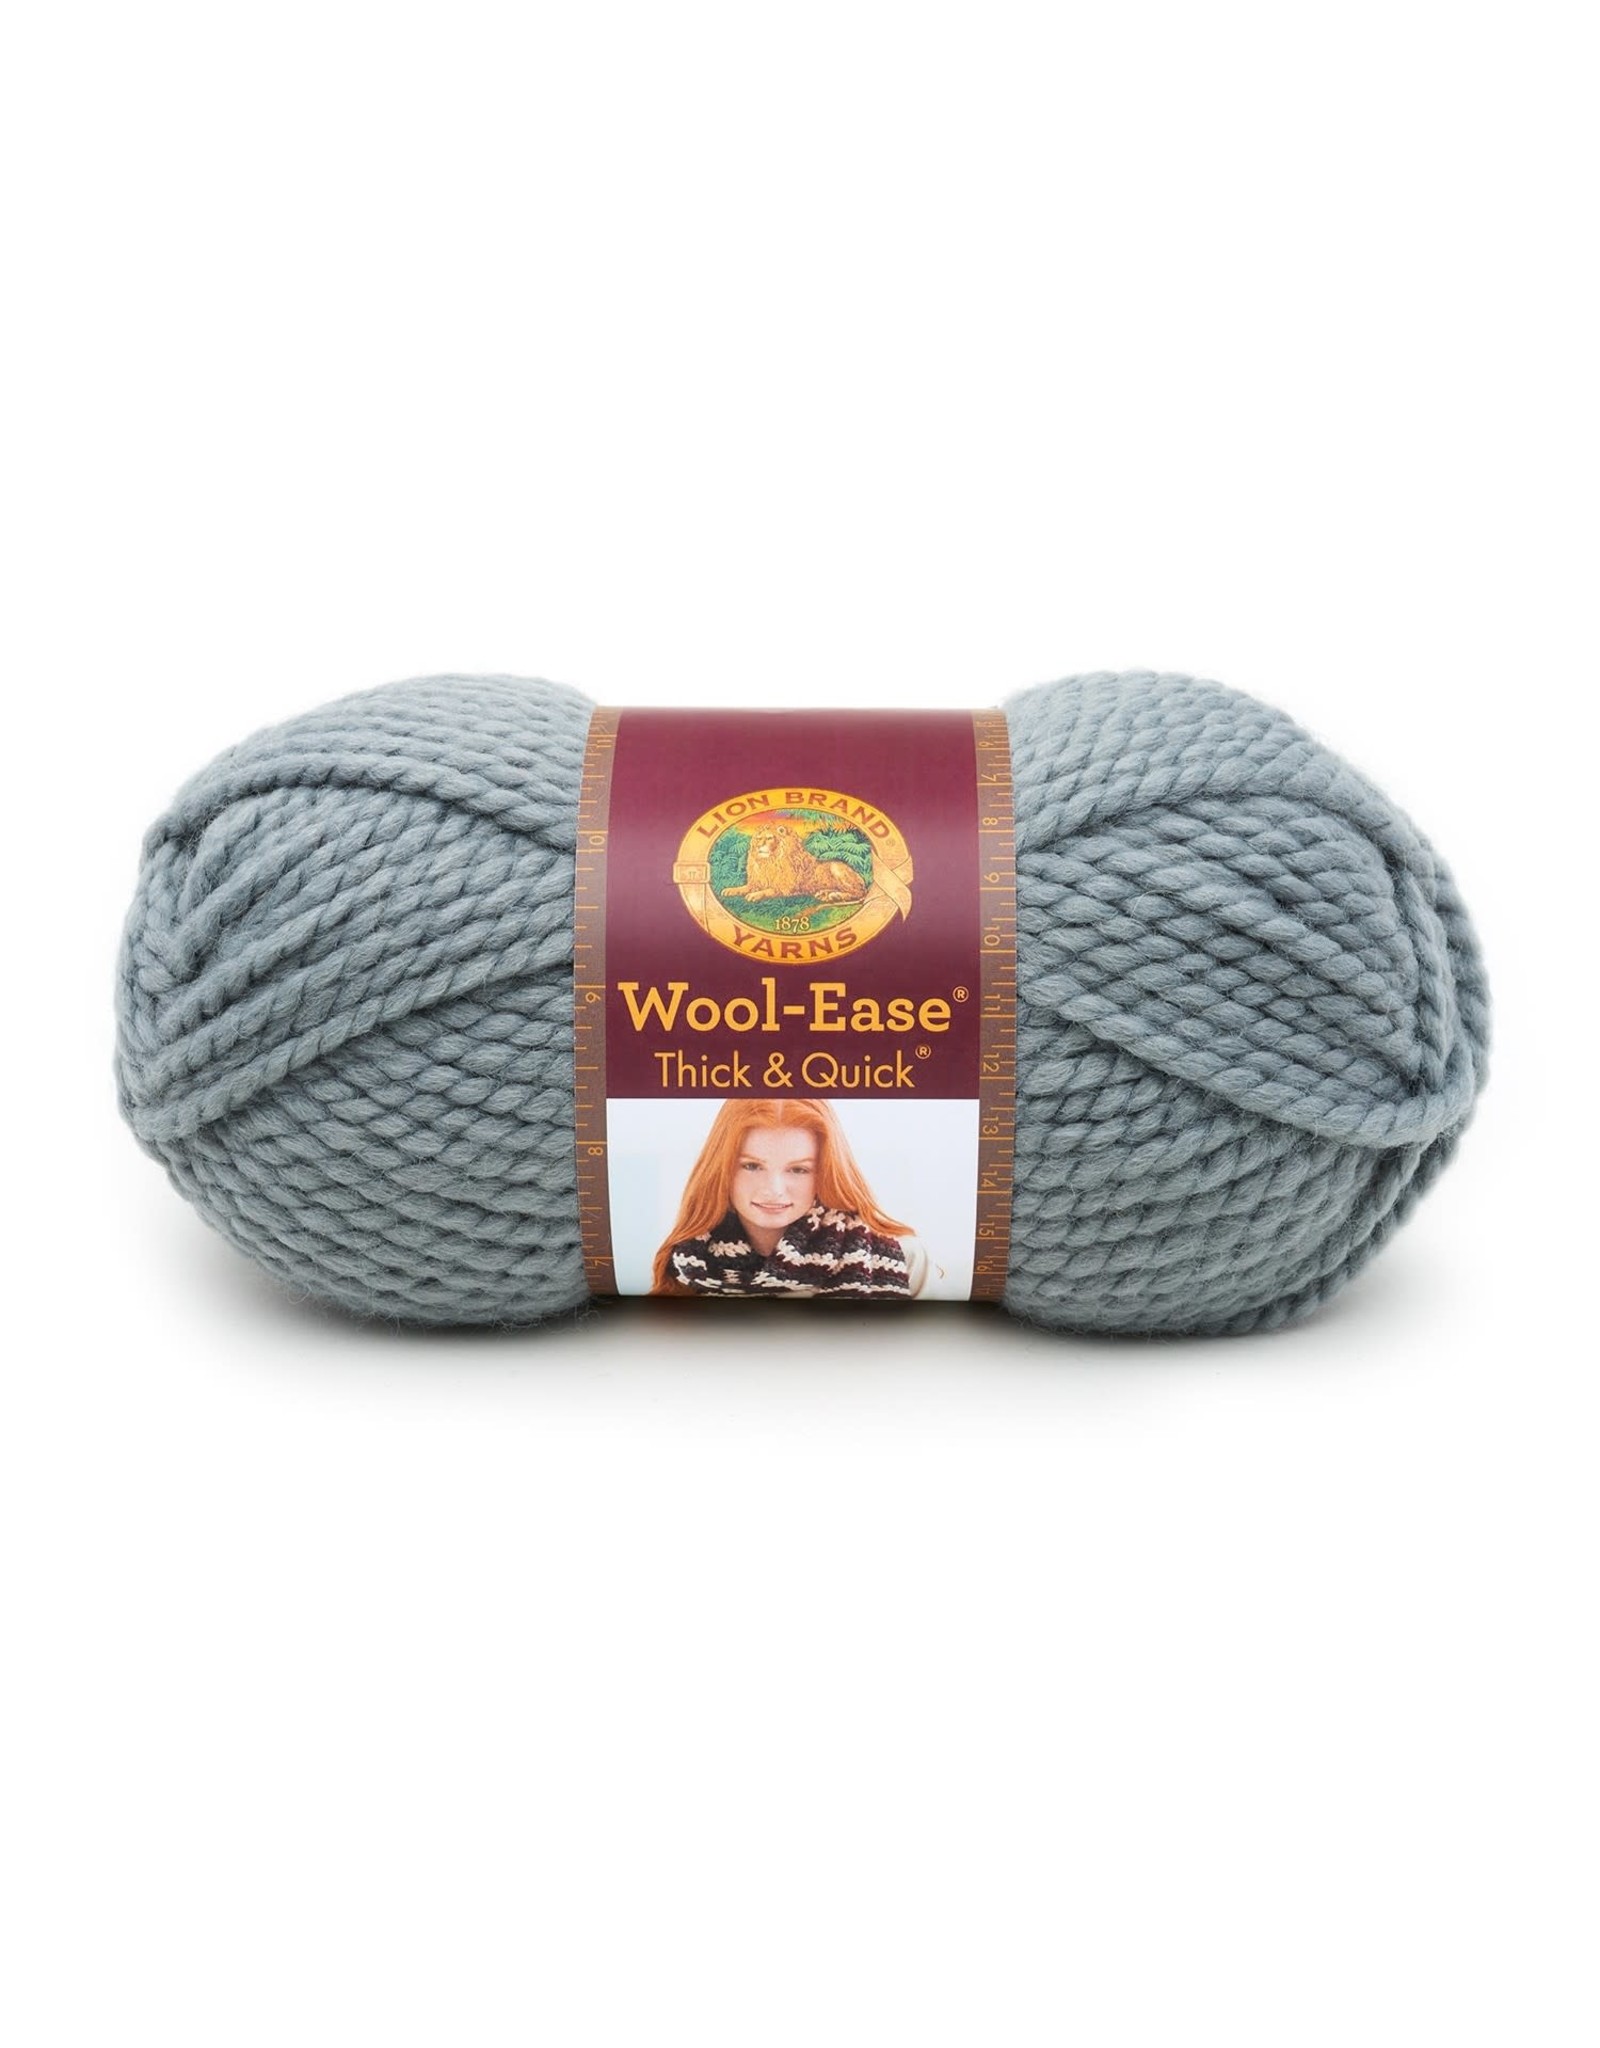 Slate - Wool Ease Thick and Quick - Lion Brand